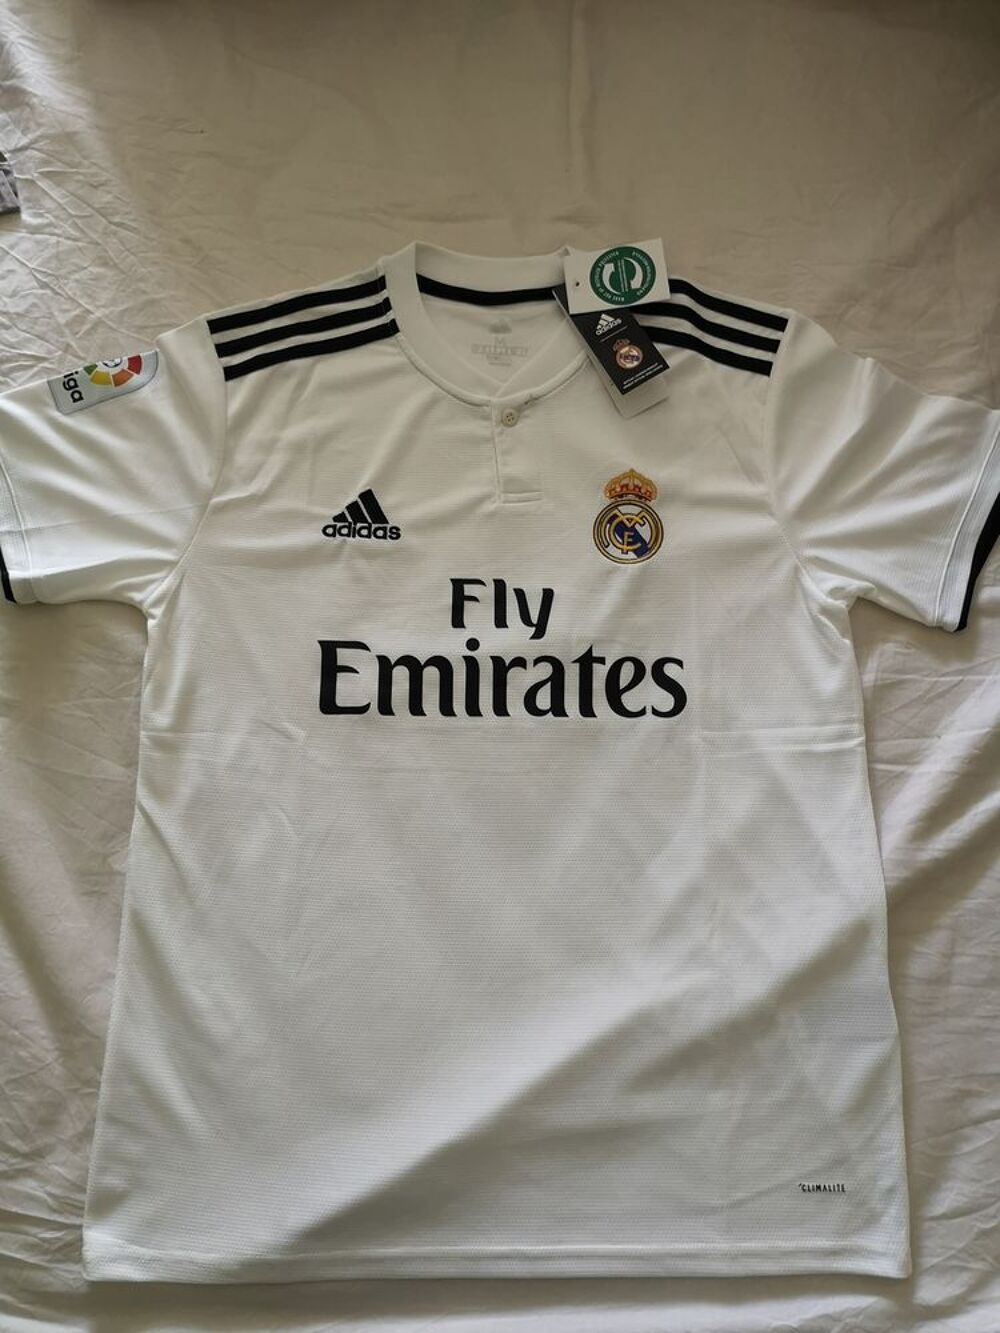 Maillots &eacute;quipes Br&eacute;sil Real Madrid Juventus Turin et OM. Vtements